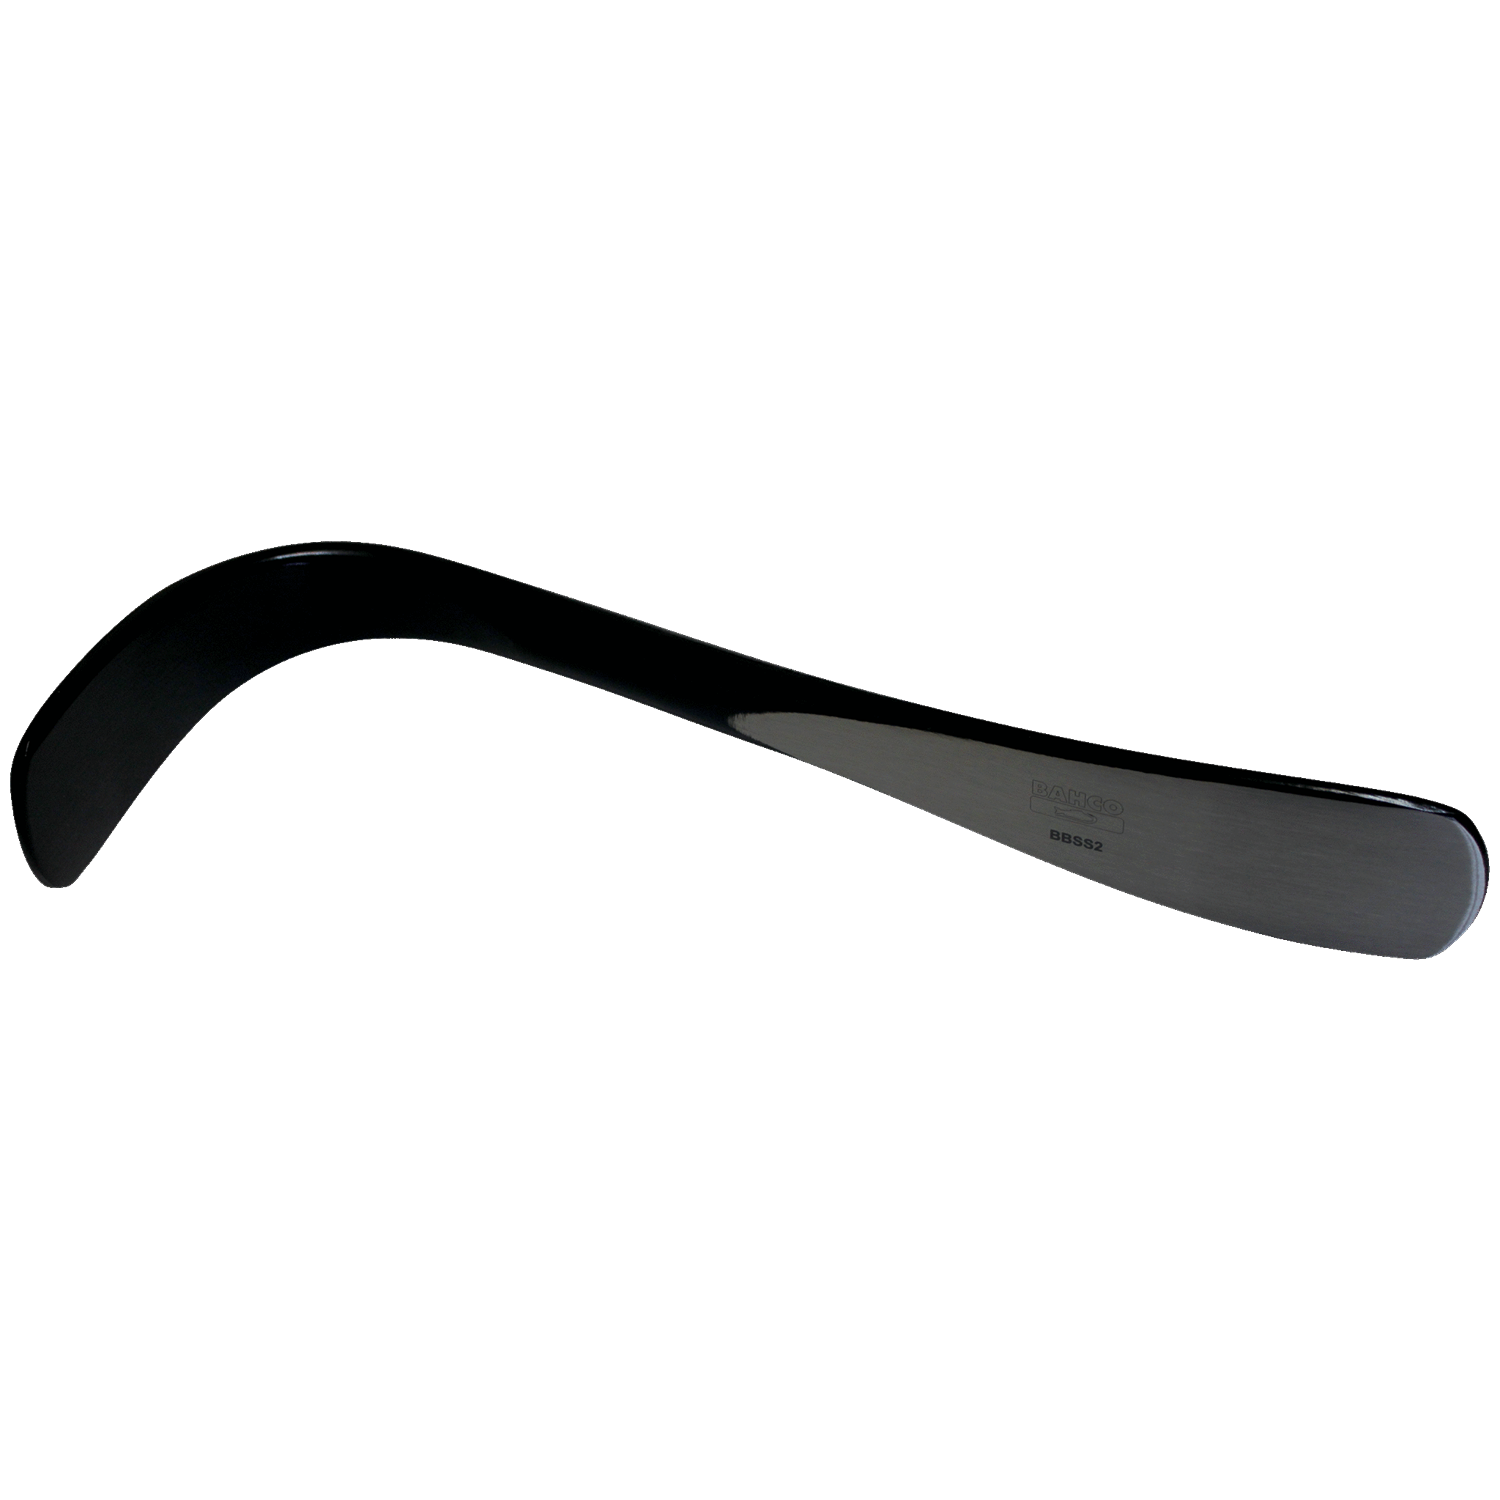 BAHCO BBSS2 Bodywork Spoon Double Short (BAHCO Tools) - Premium Bodywork Spoon from BAHCO - Shop now at Yew Aik.